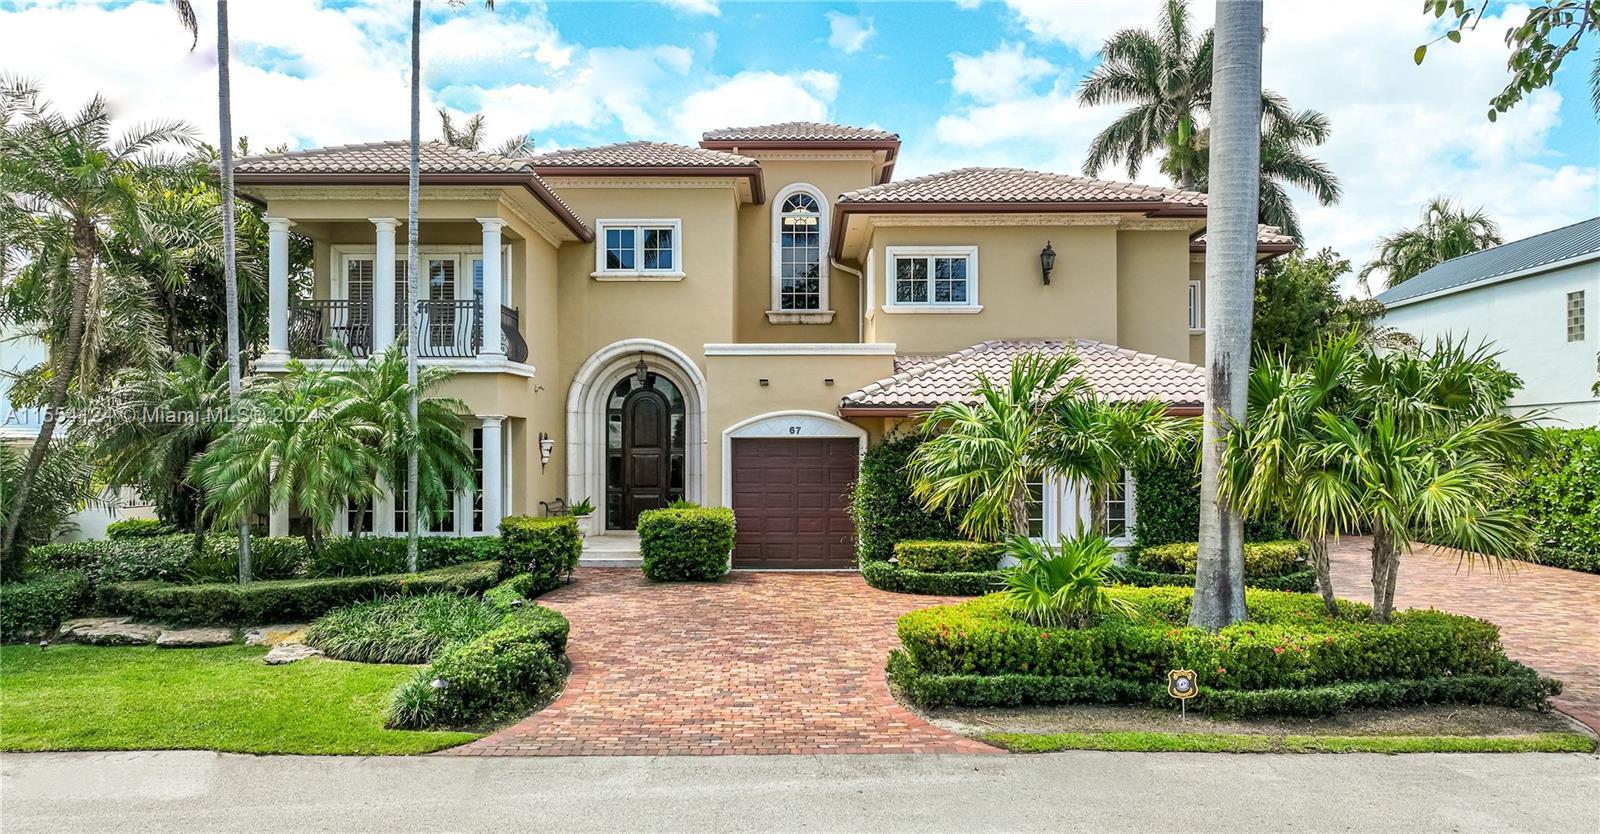 Photo of 67 Royal Palm Dr in Fort Lauderdale, FL